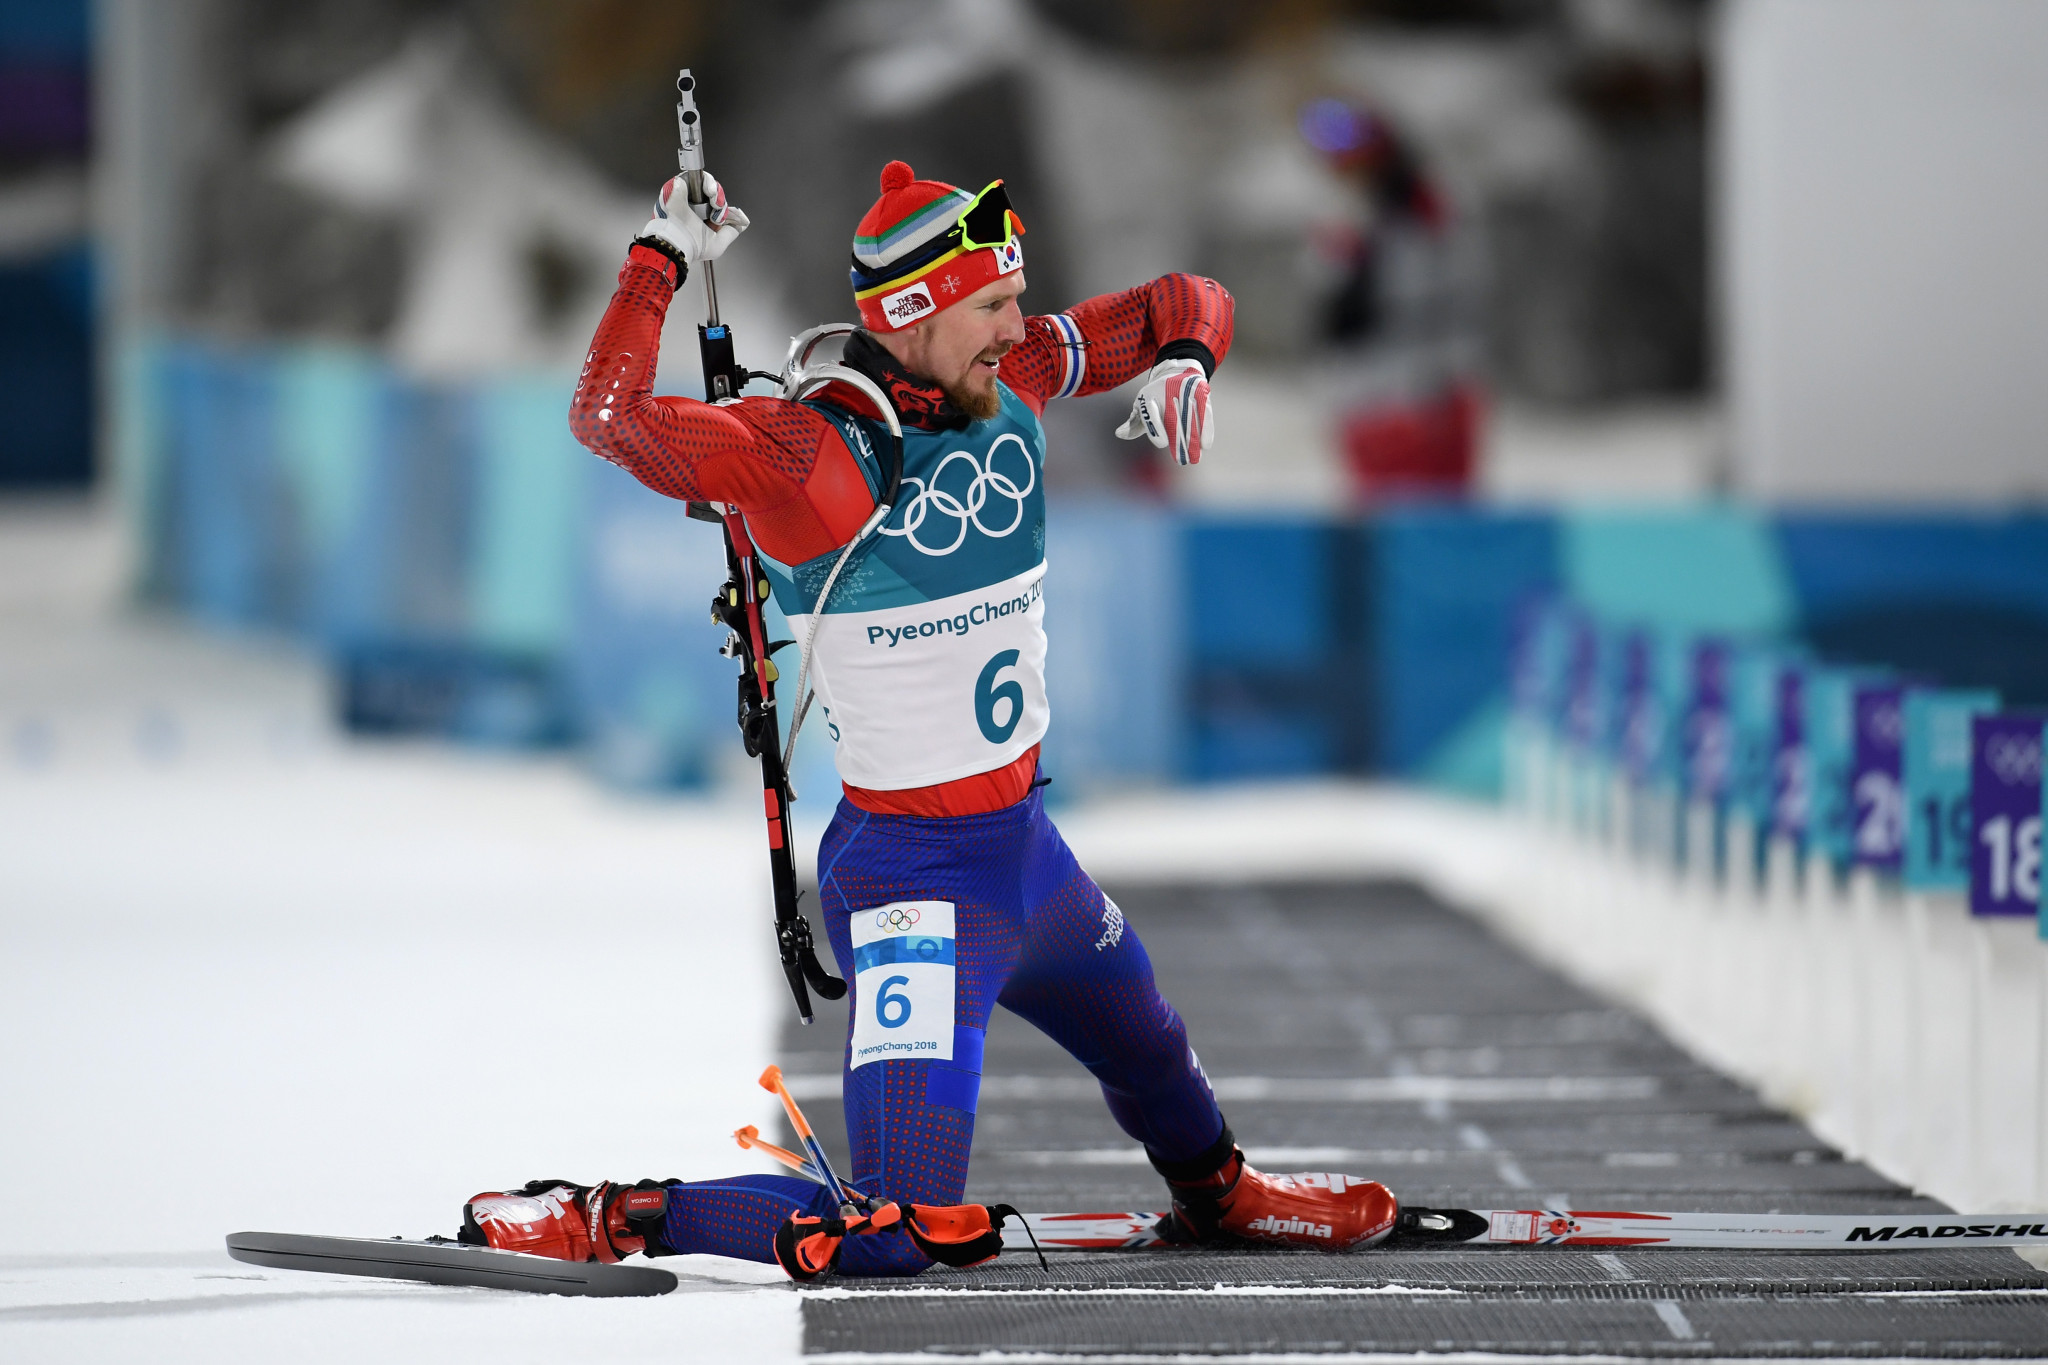 Biathlete Lapshin given 12-month ban for doping offence, can compete at Beijing 2022